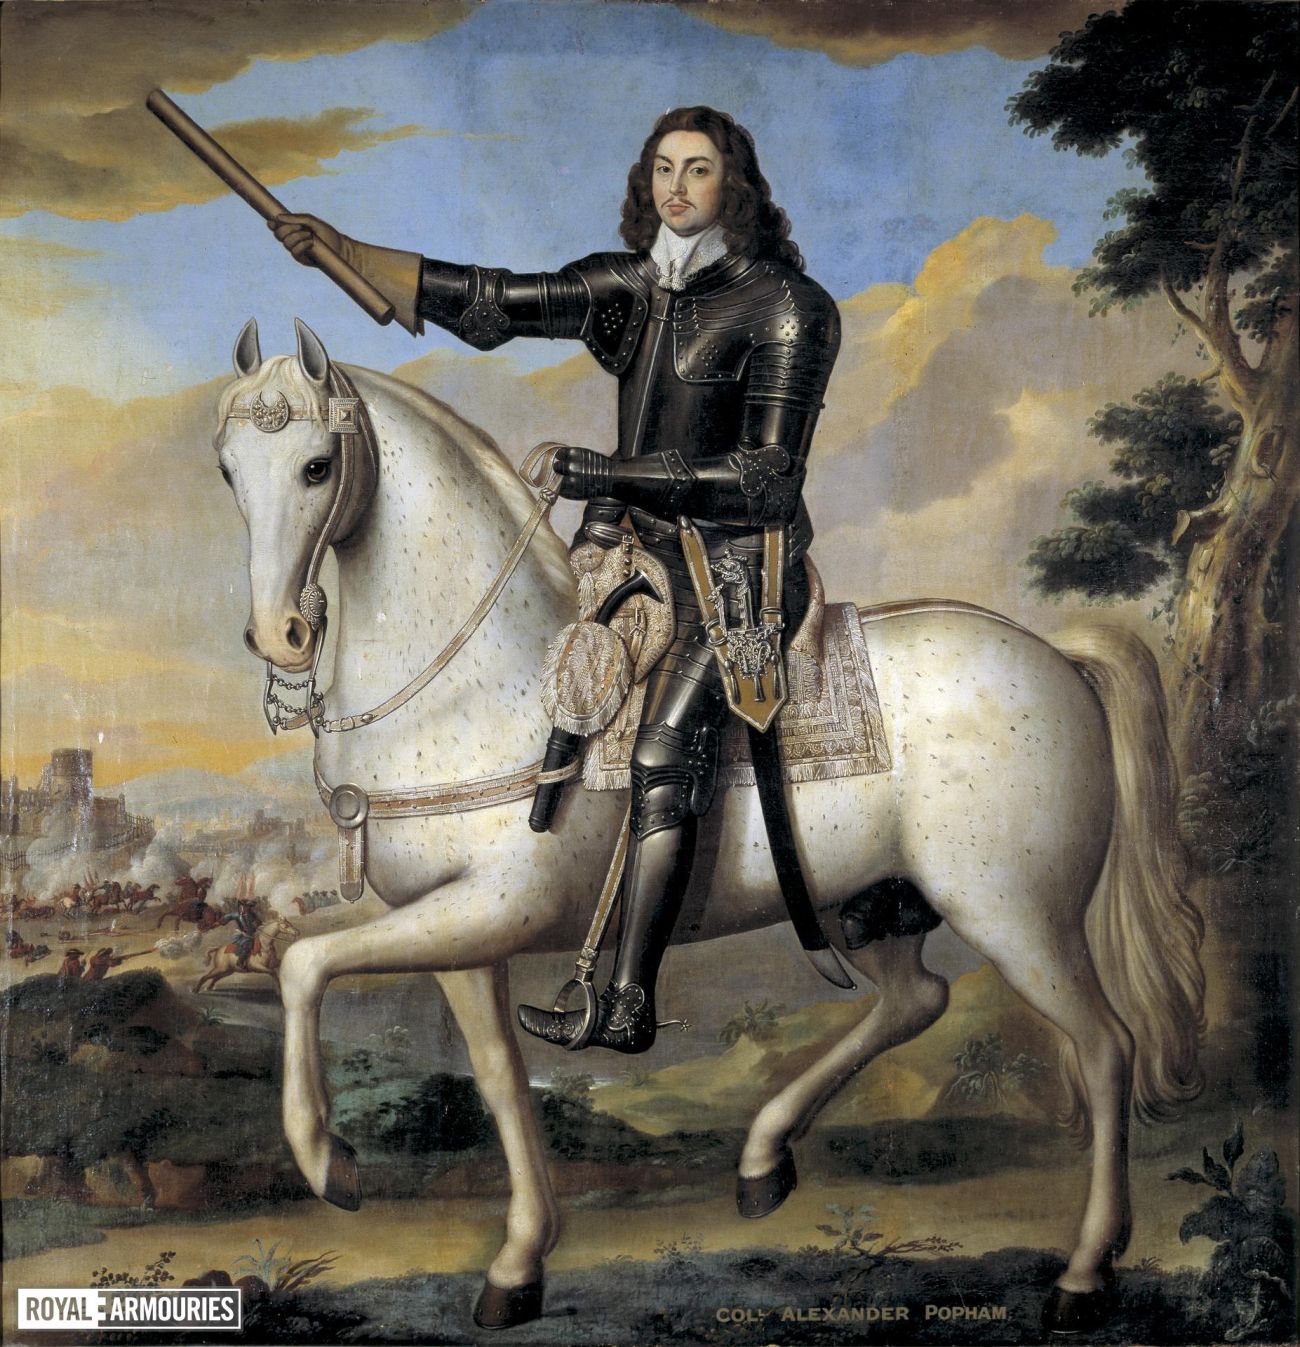 English civil war commander with long black hair riding a grey horse, while wearing black armour. 